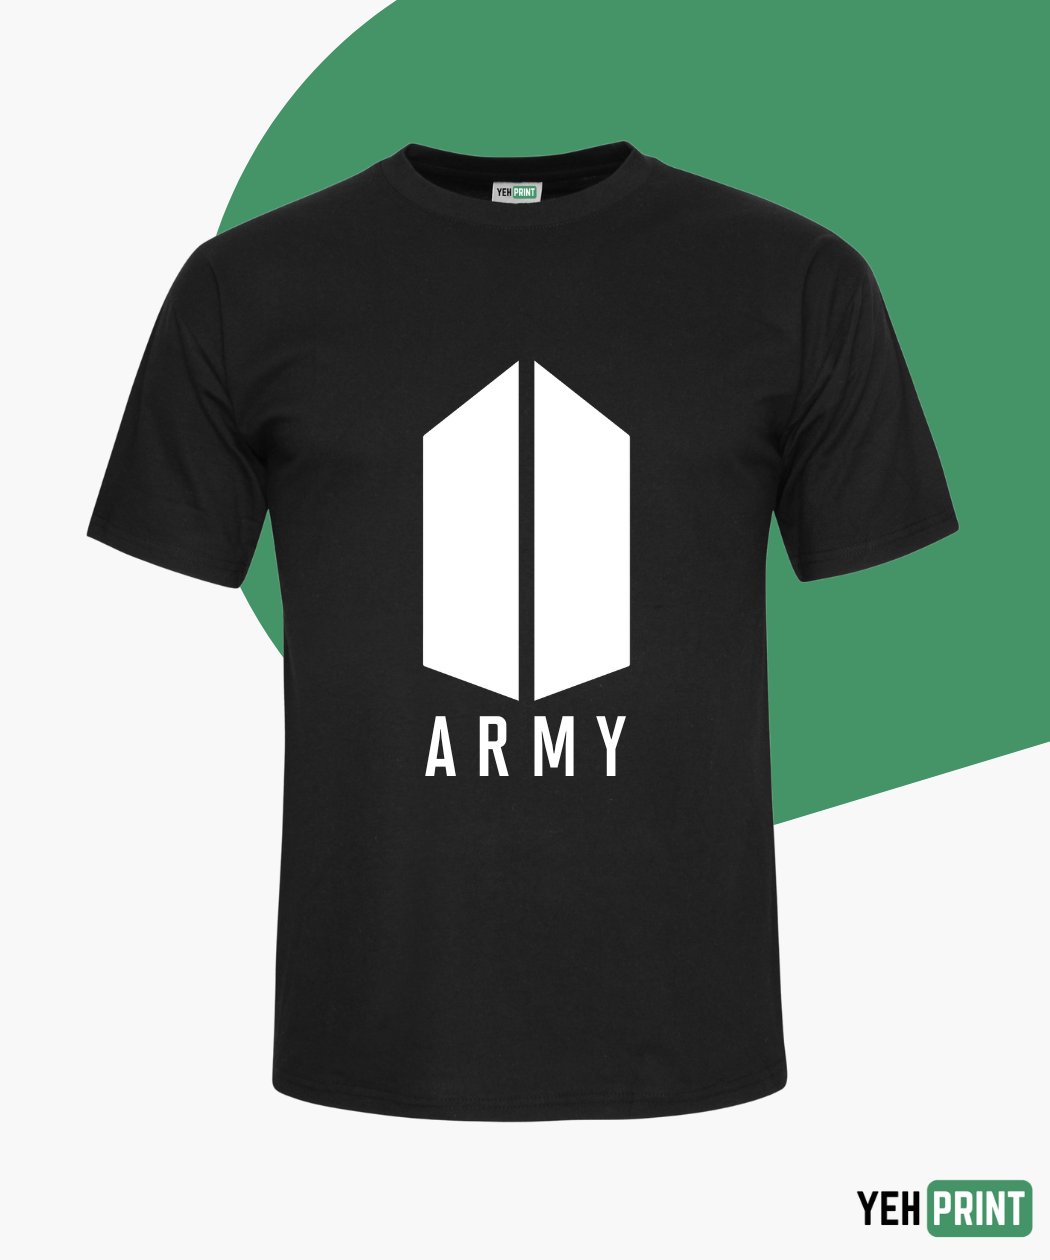 BTS Army Logo Printed Cotton T-Shirt | Summer Collection BTS shirts for Boys and Girls